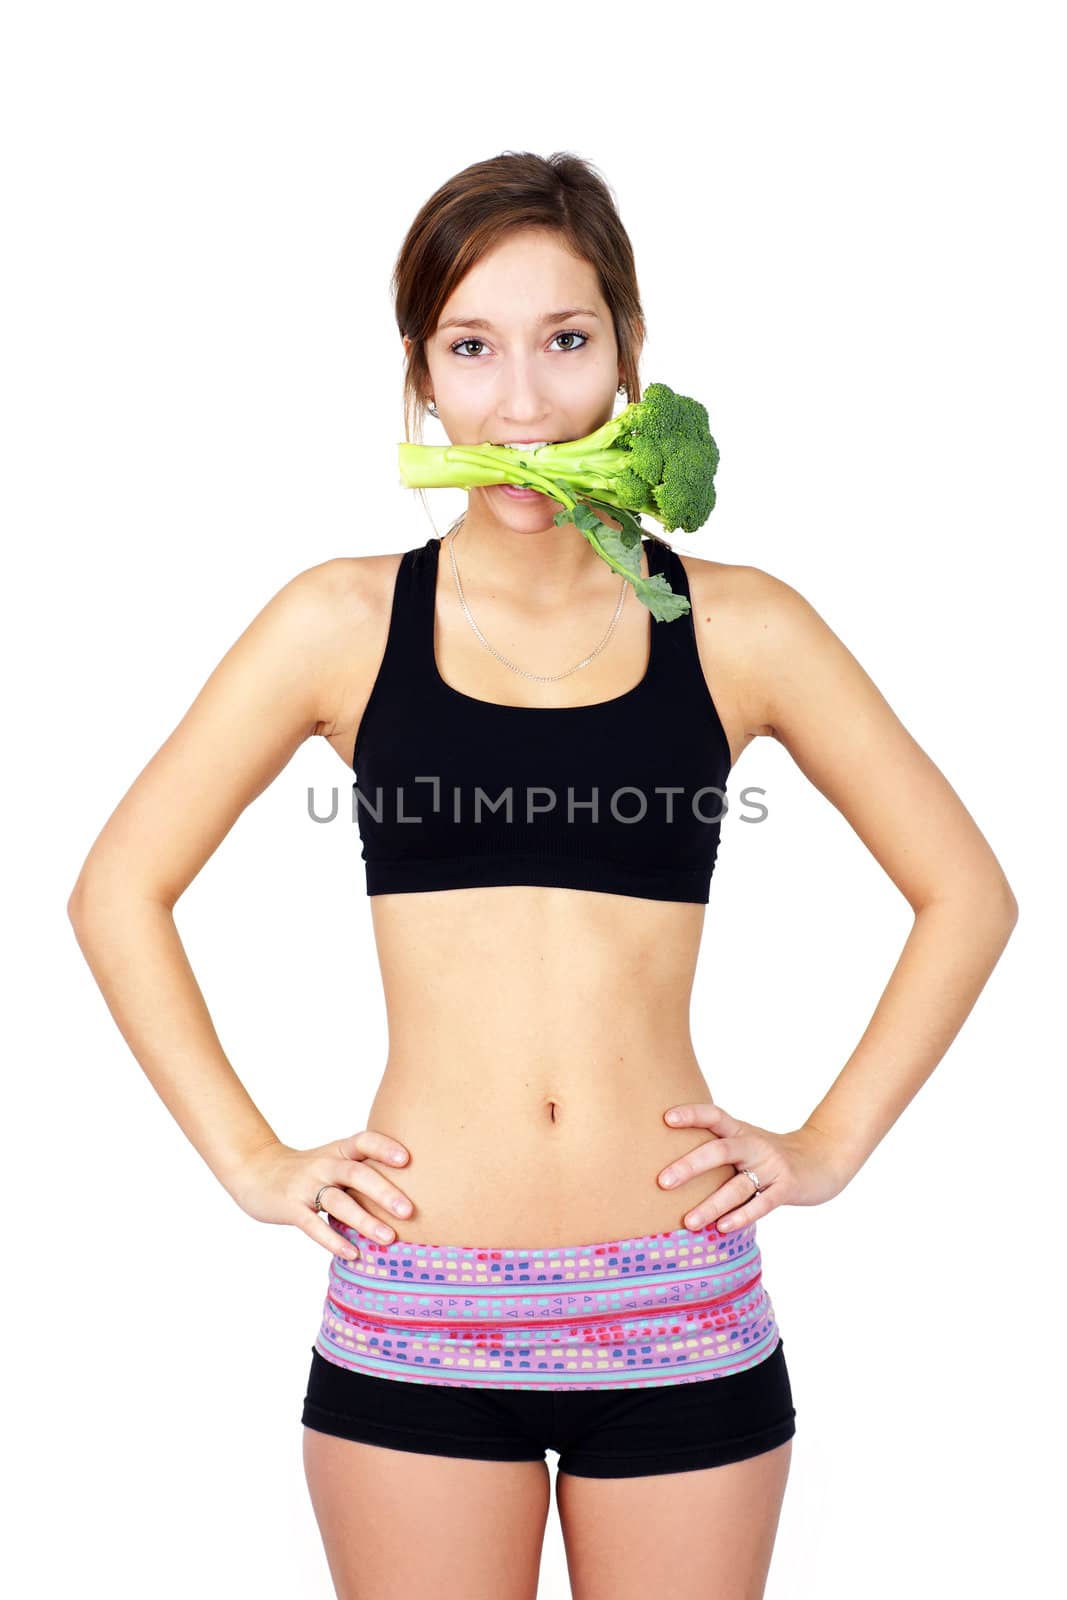 Healthy young woman eating broccoli by Mirage3